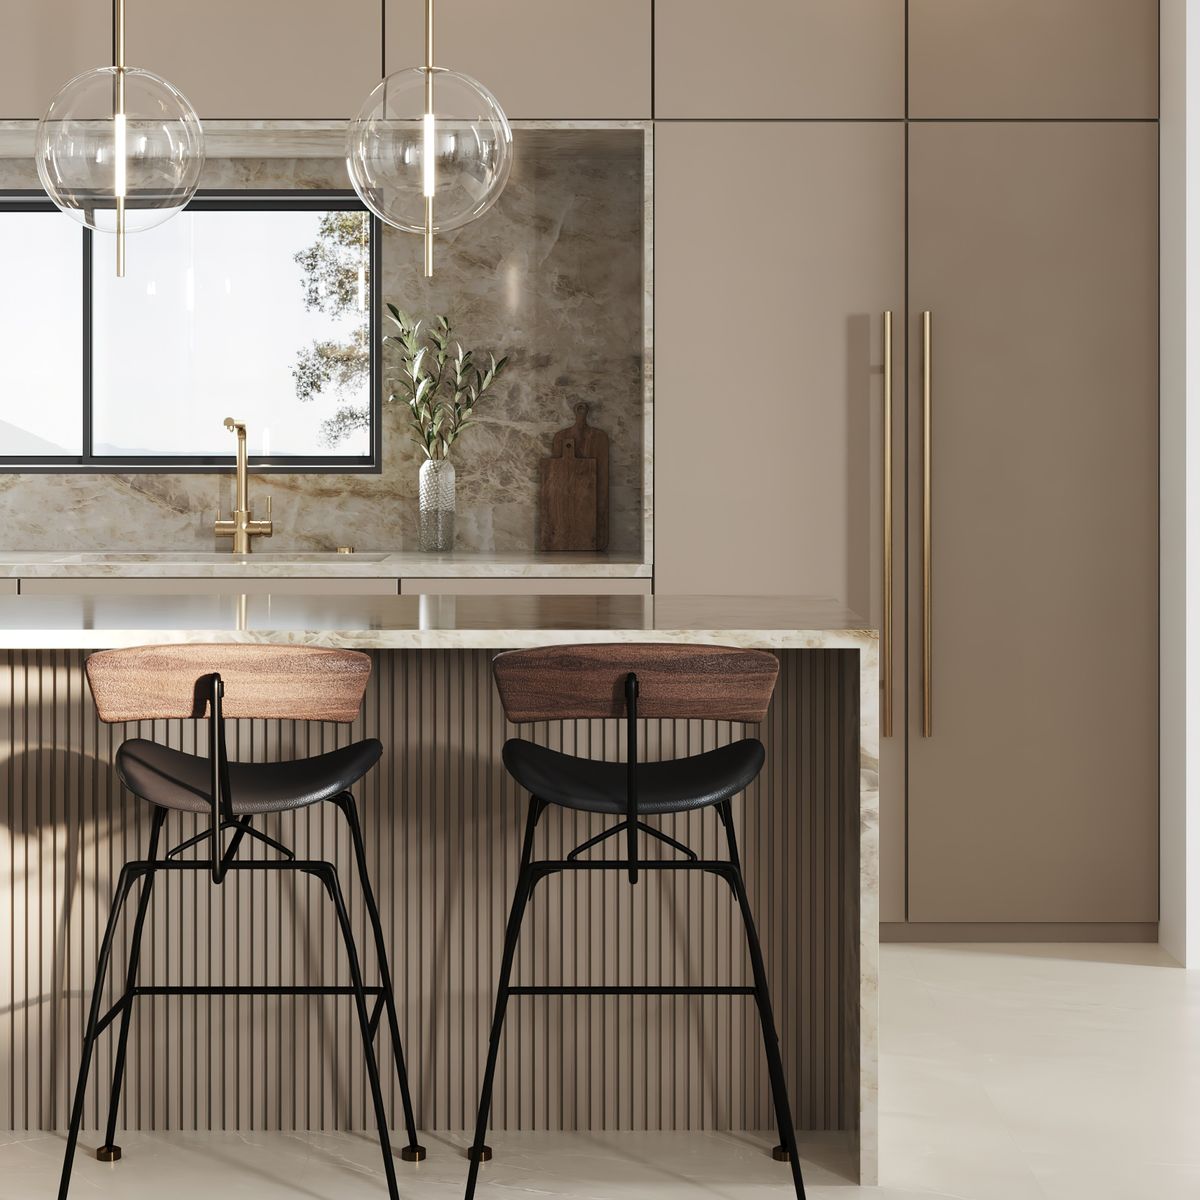 Modern Kitchen interior, bench stools, and glass lamps - Pakenham Property and Real Estate